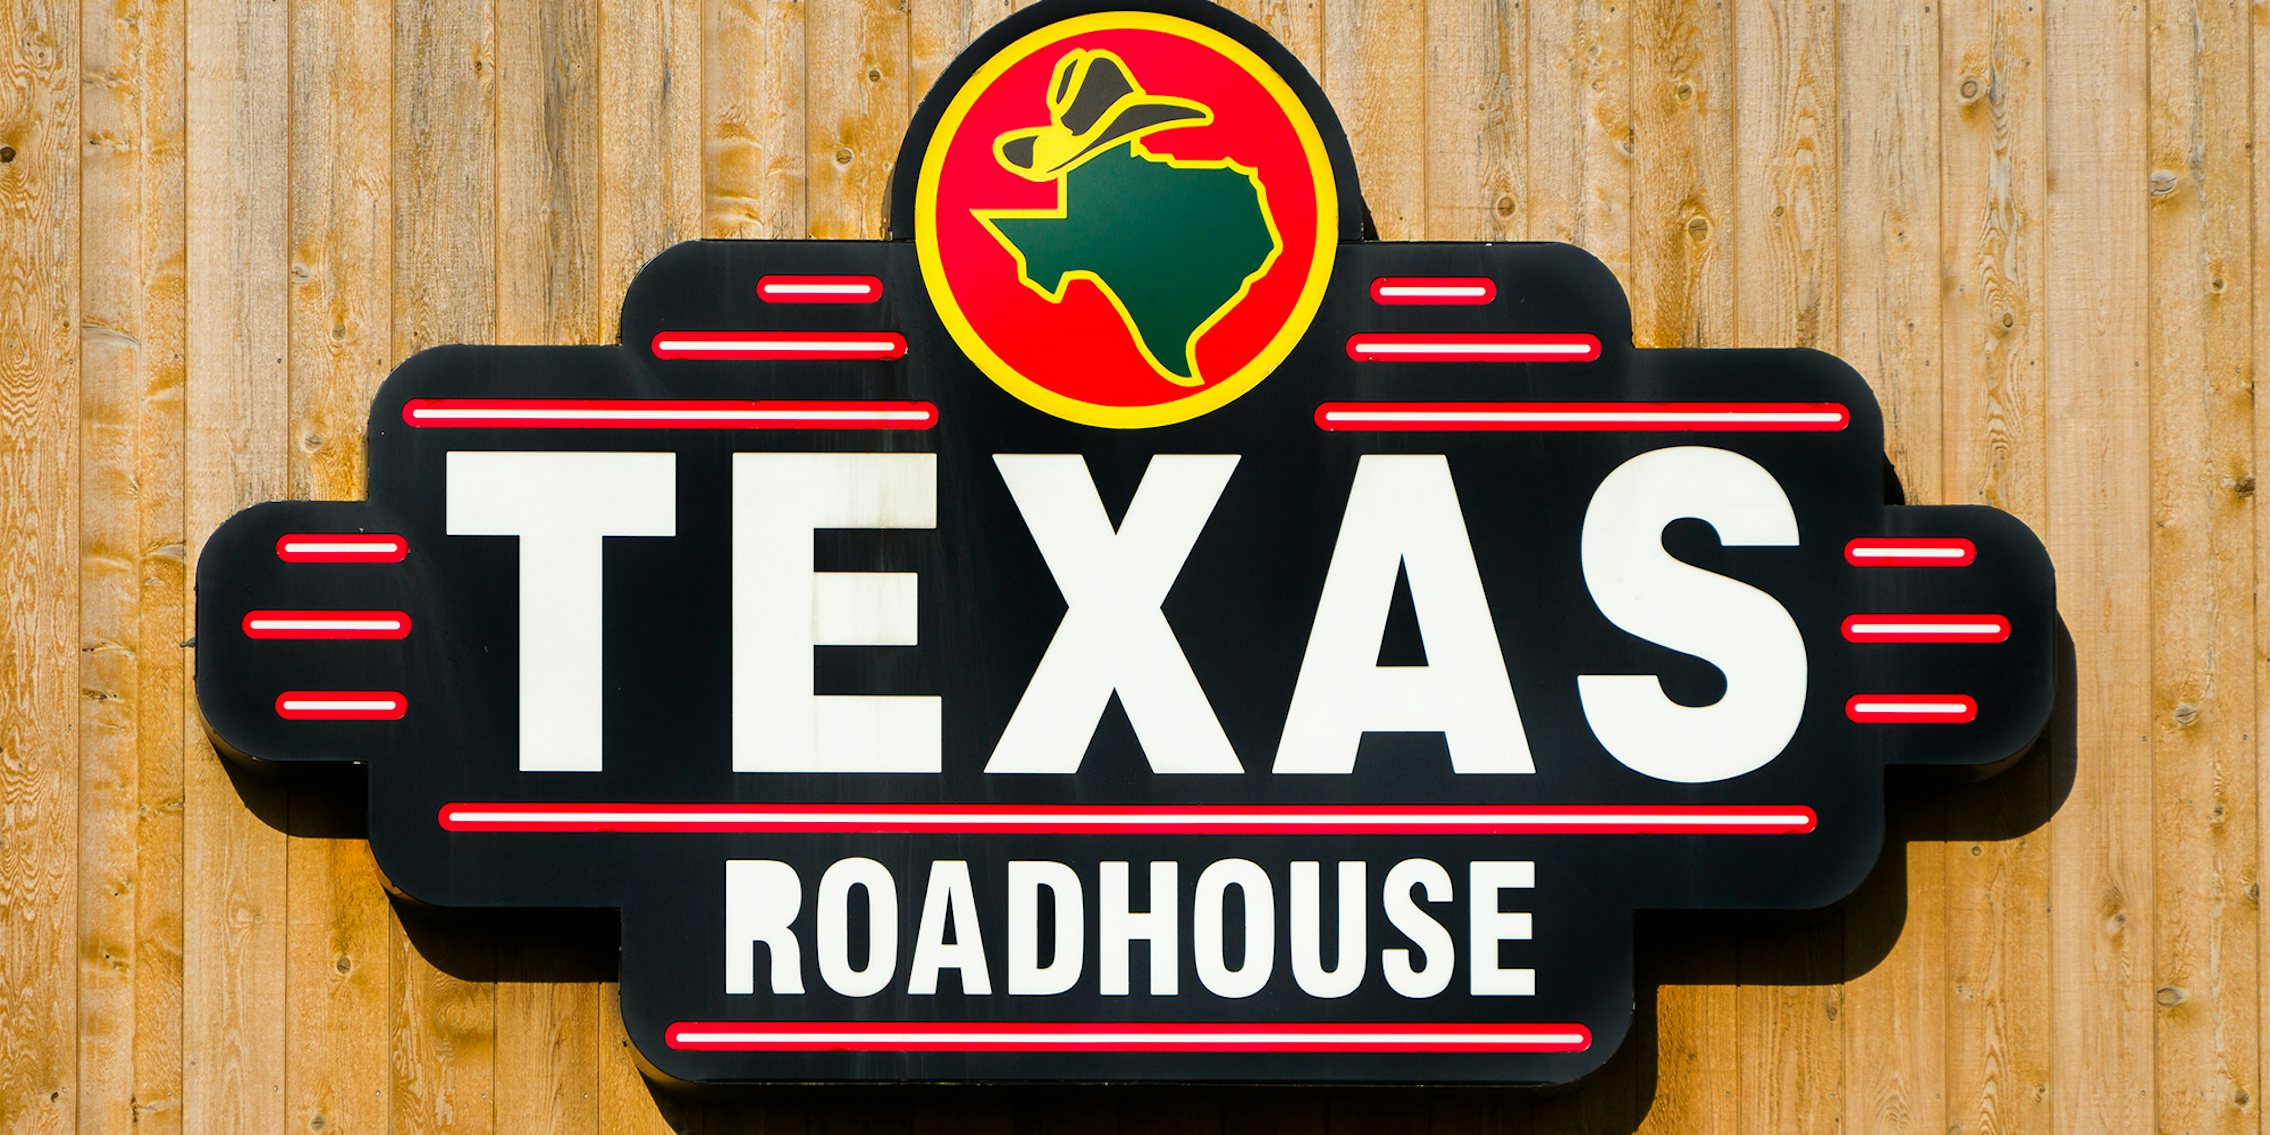 Texas Roadhouse exterior sign and logo